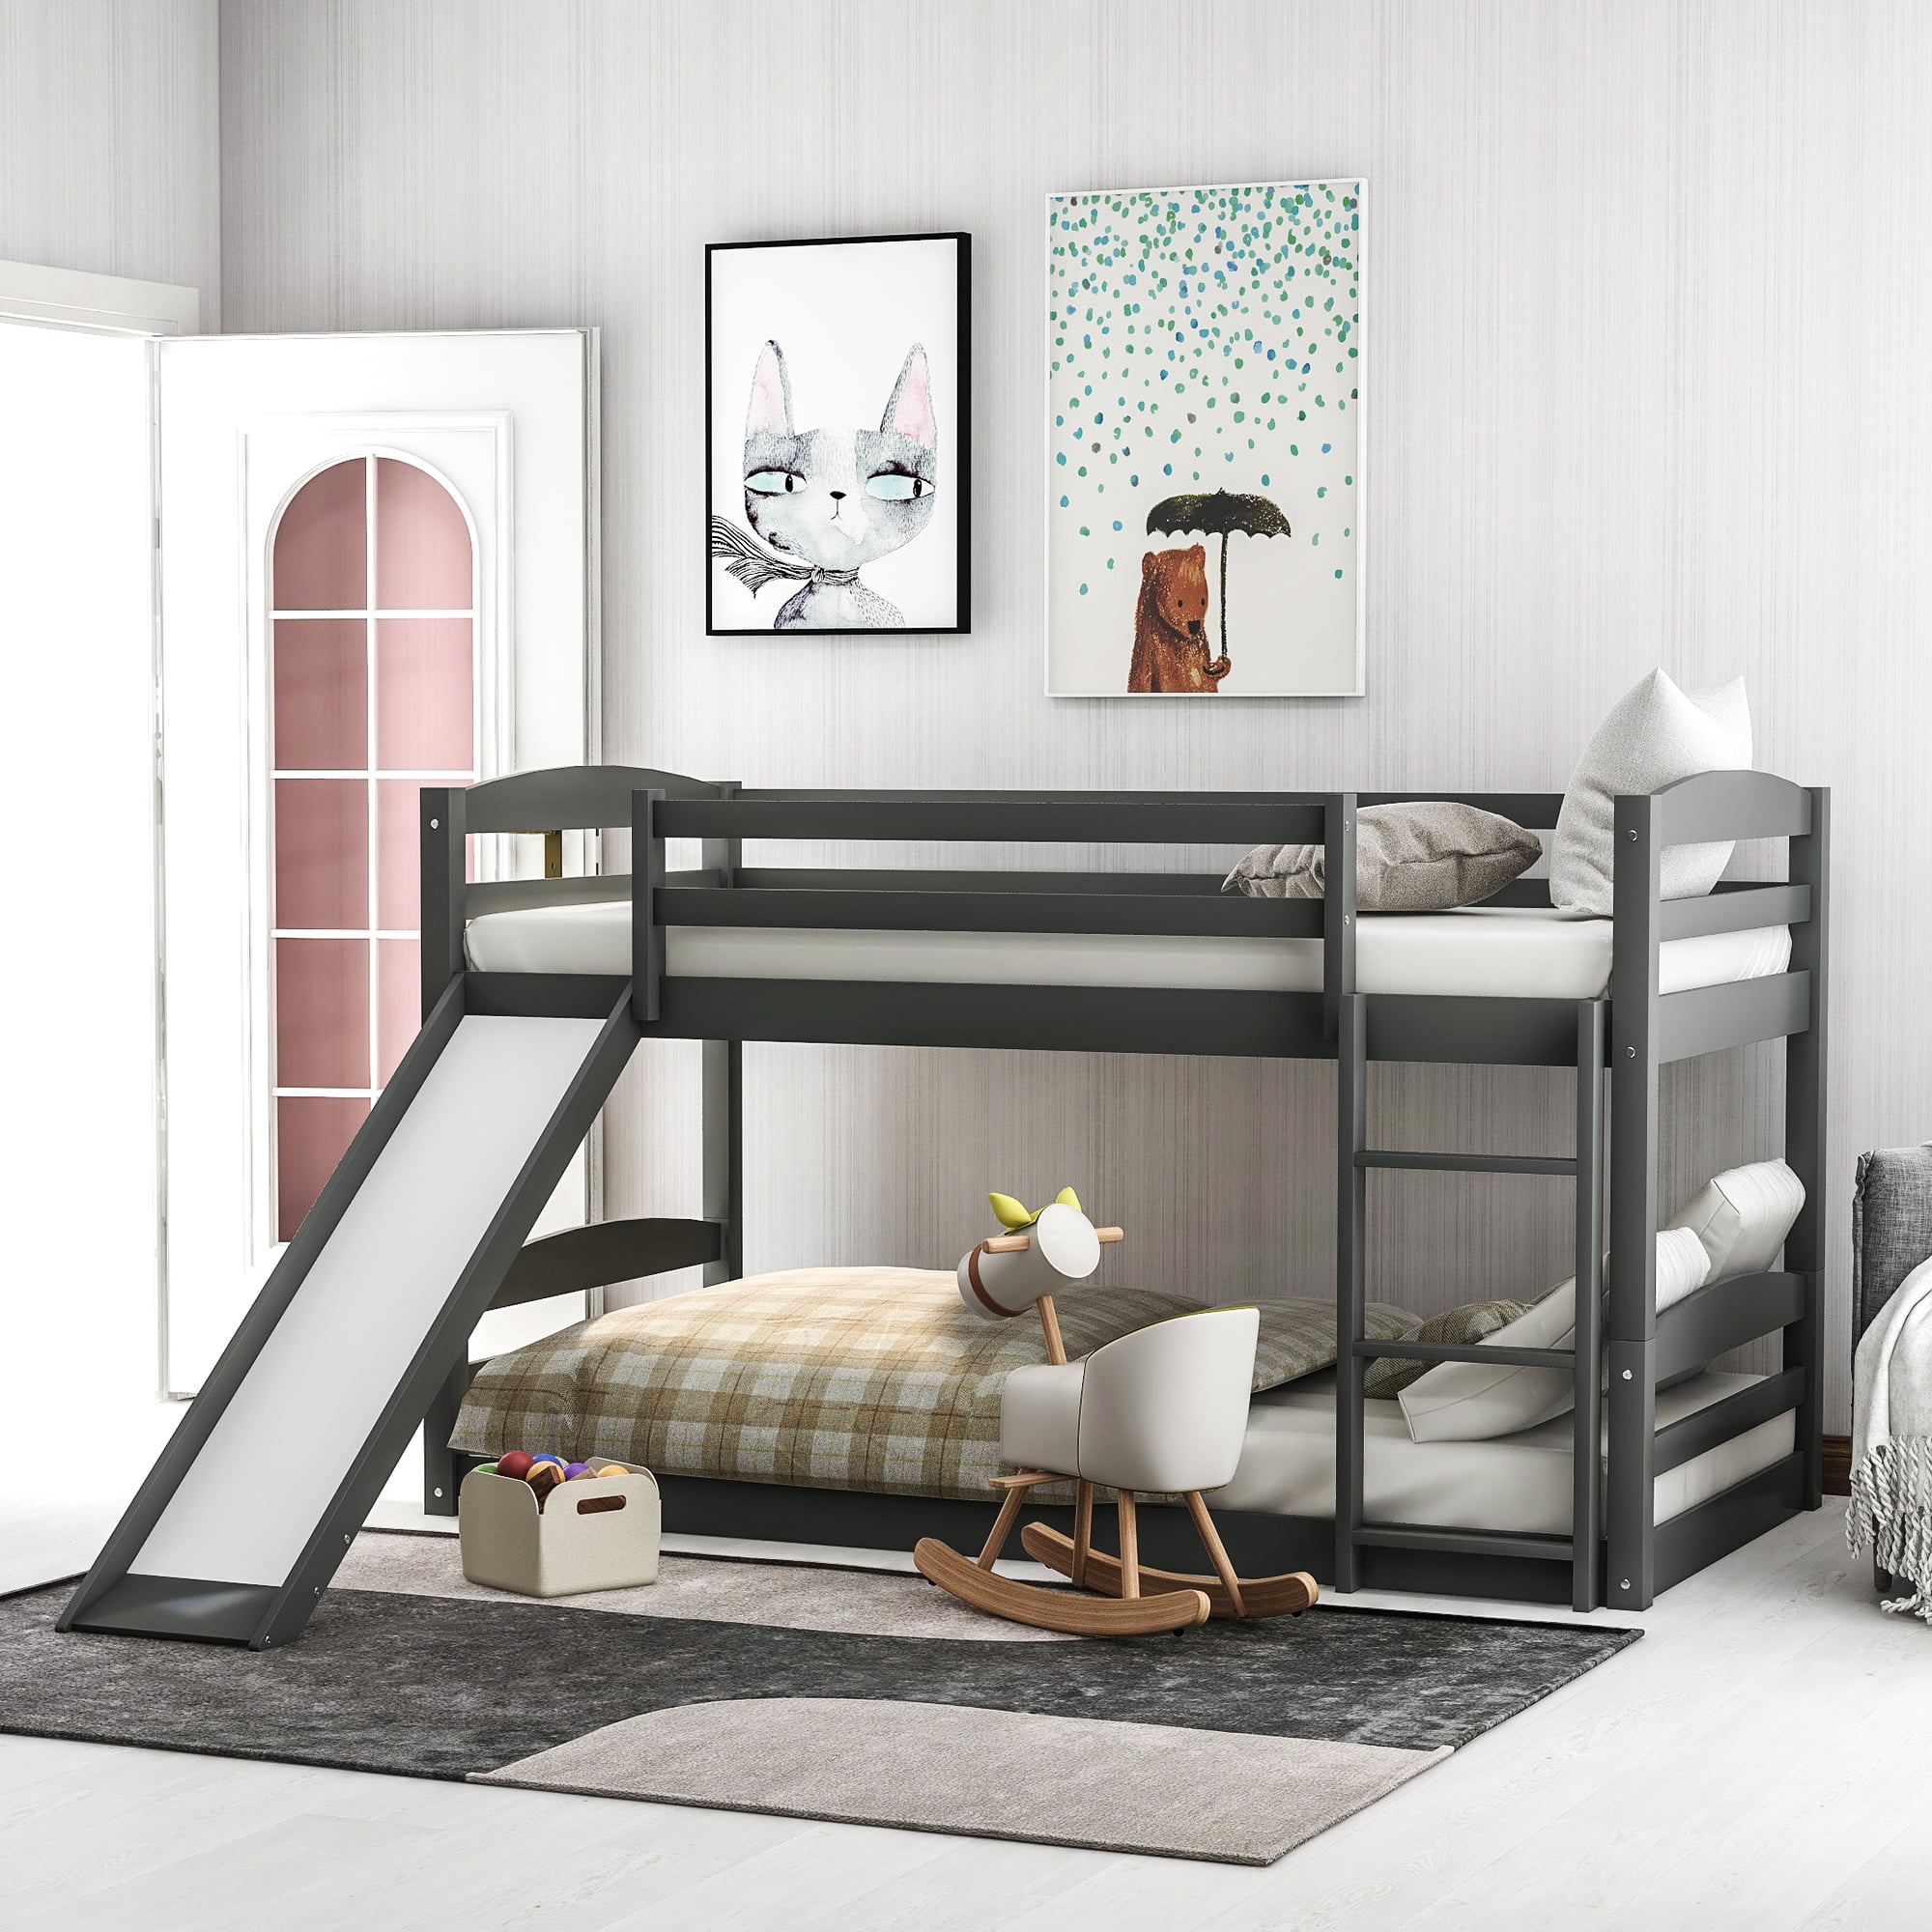 Twin Bunk Beds With Slide For Kids Low, Are Loft Beds Safe For 5 Year Olds